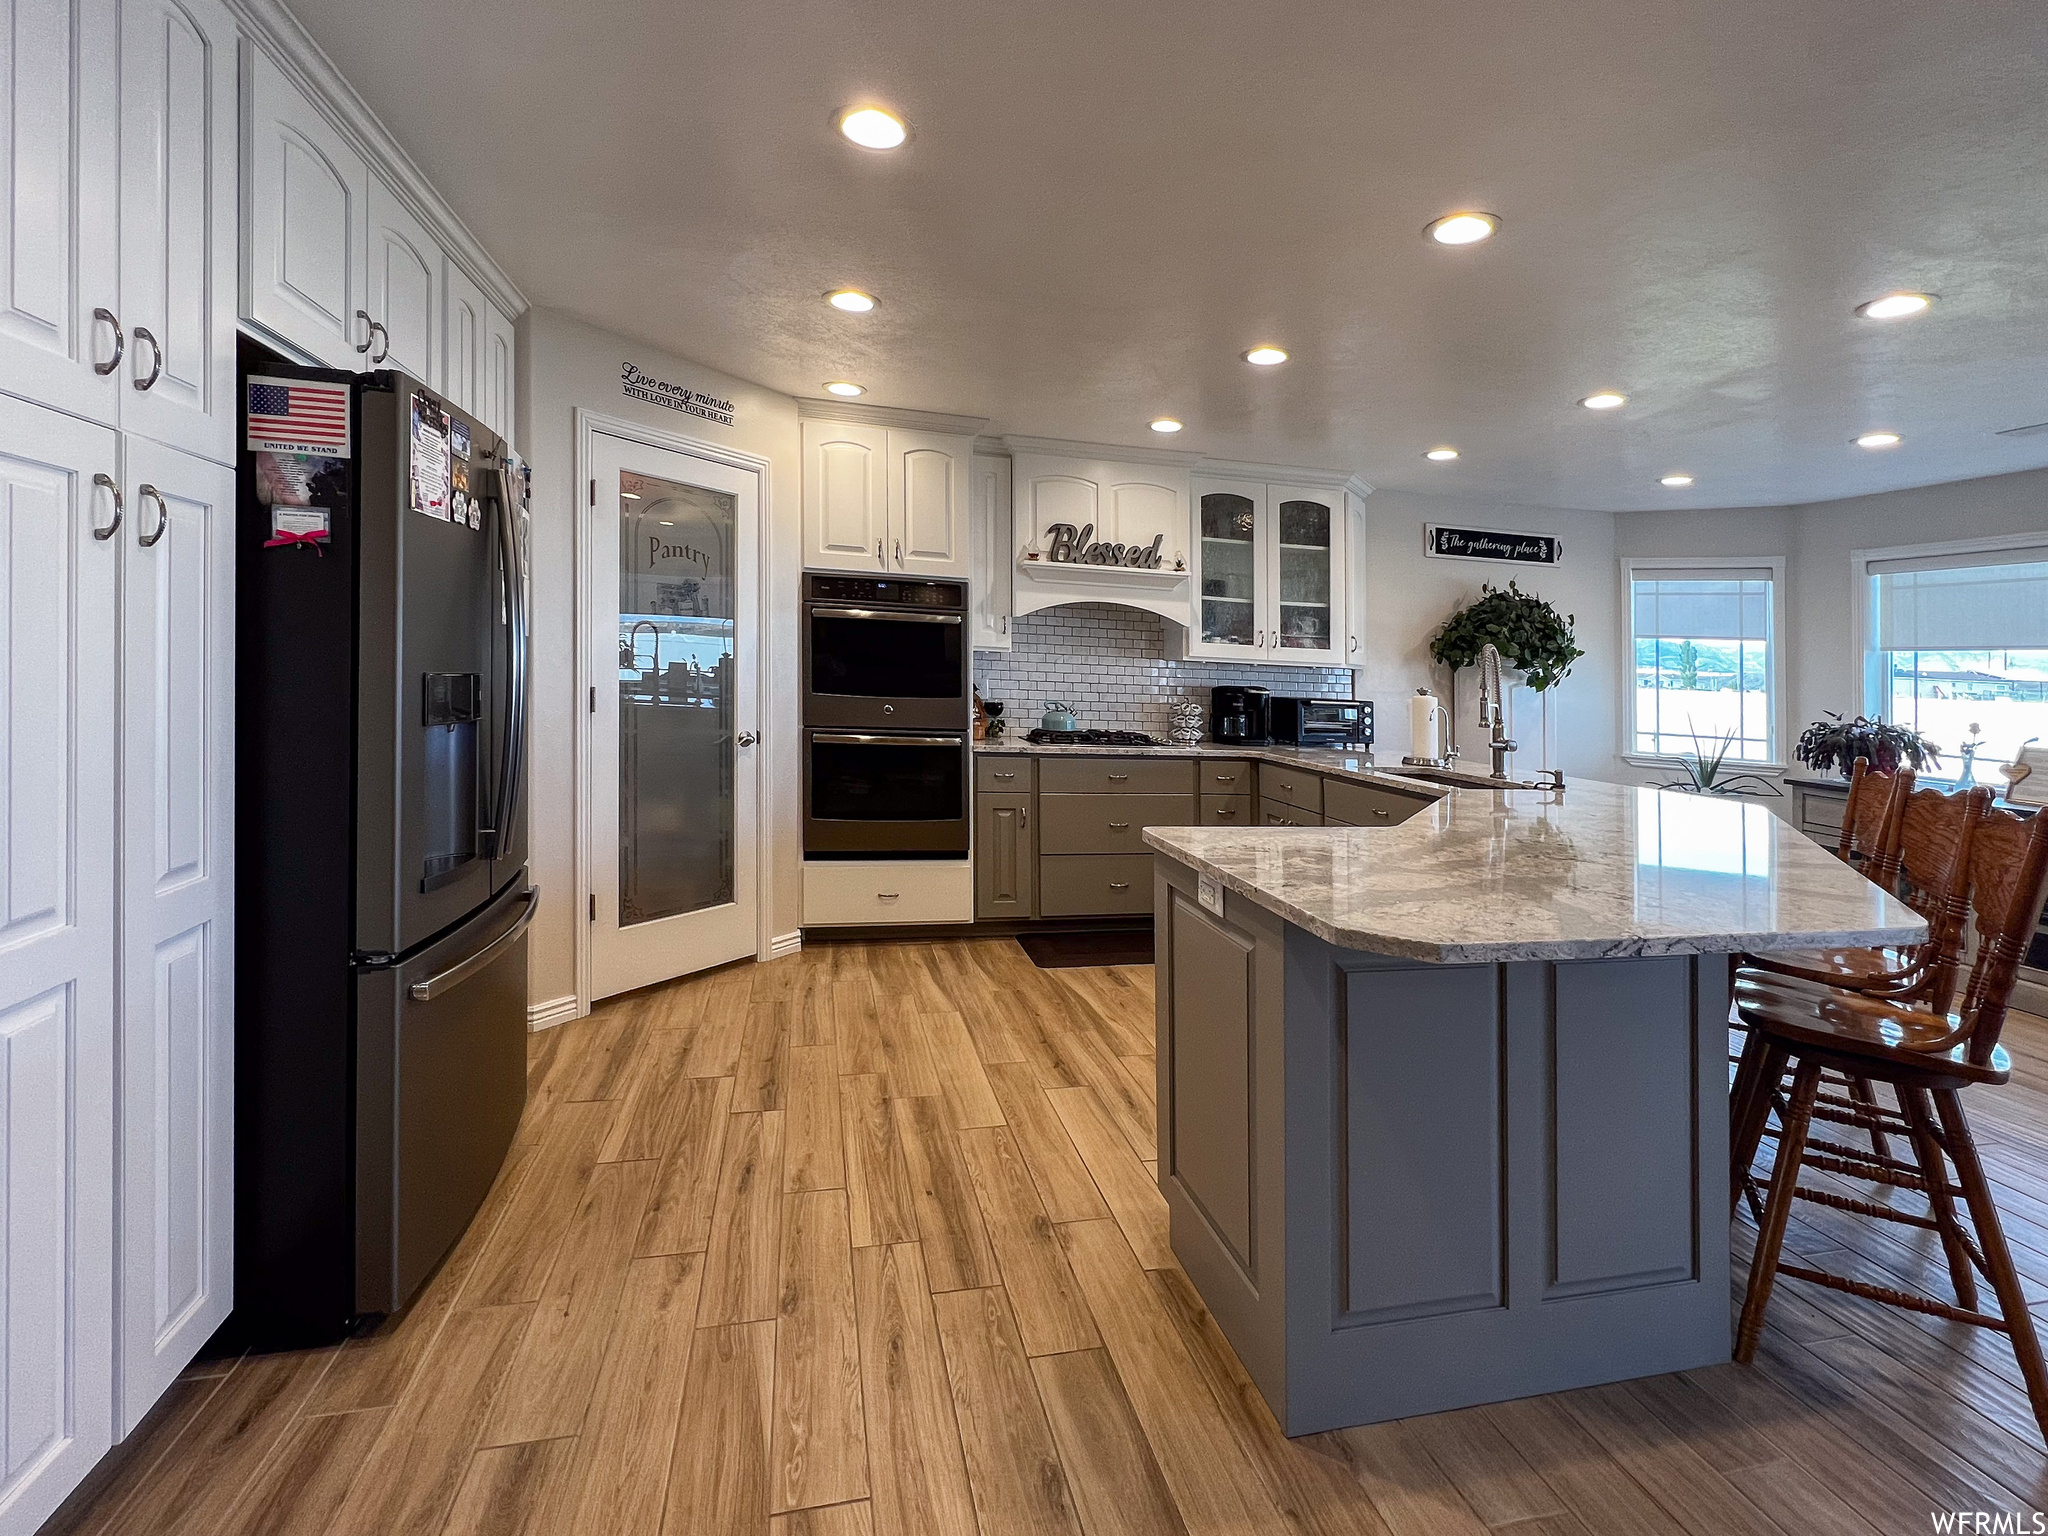 Kitchen featuring a breakfast bar, refrigerator, double oven, light colored floors, white cabinets, and stone countertops